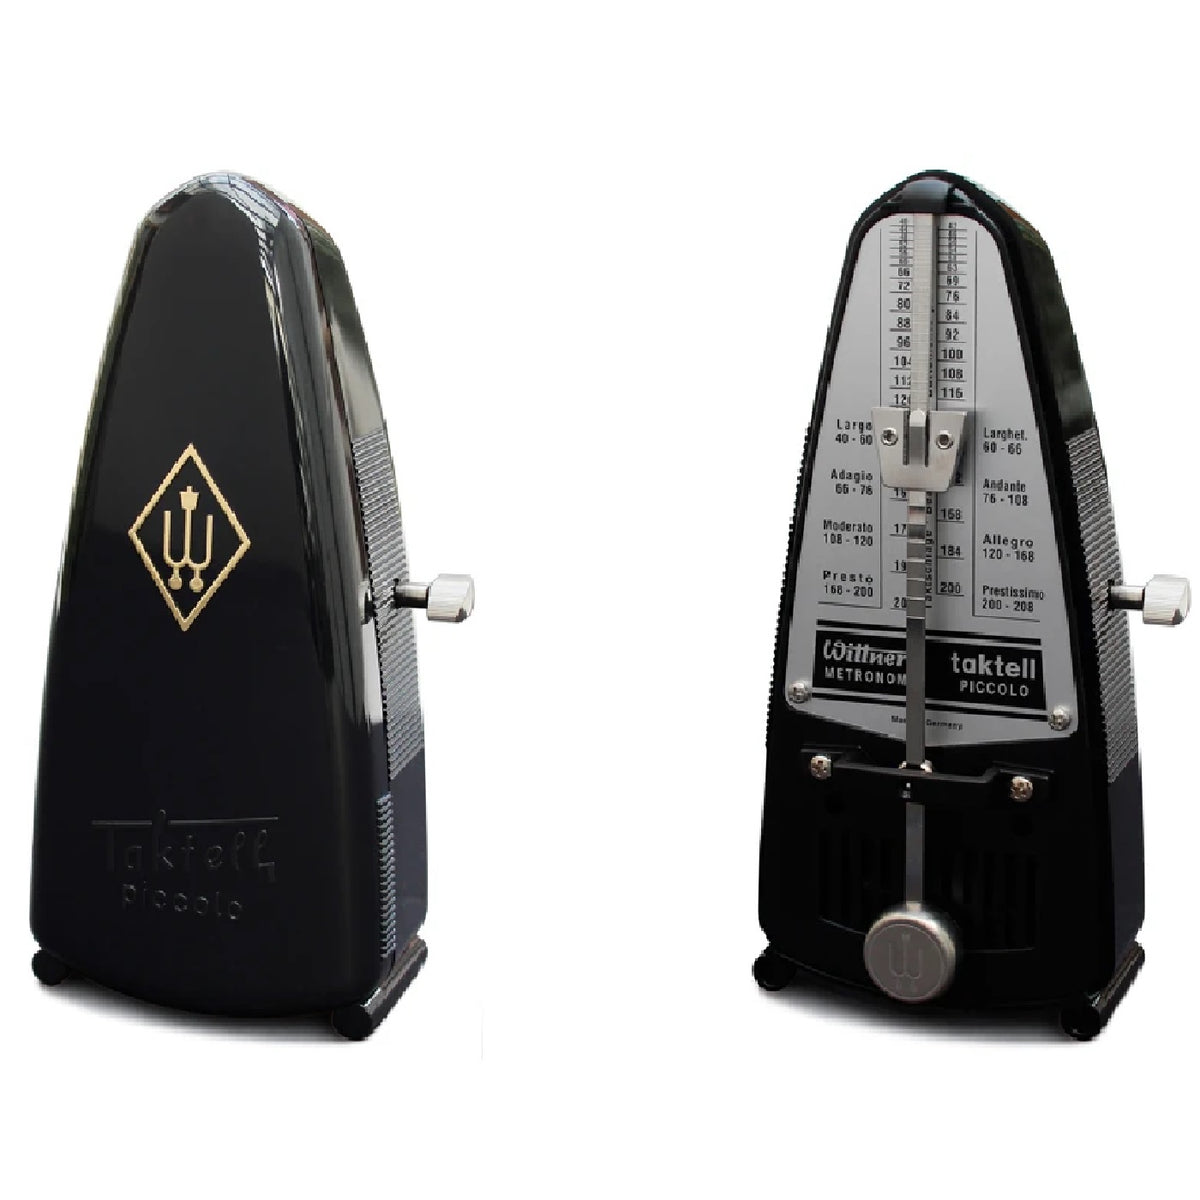 Wittner Taktell Piccolo portable metronome - VM Collectables